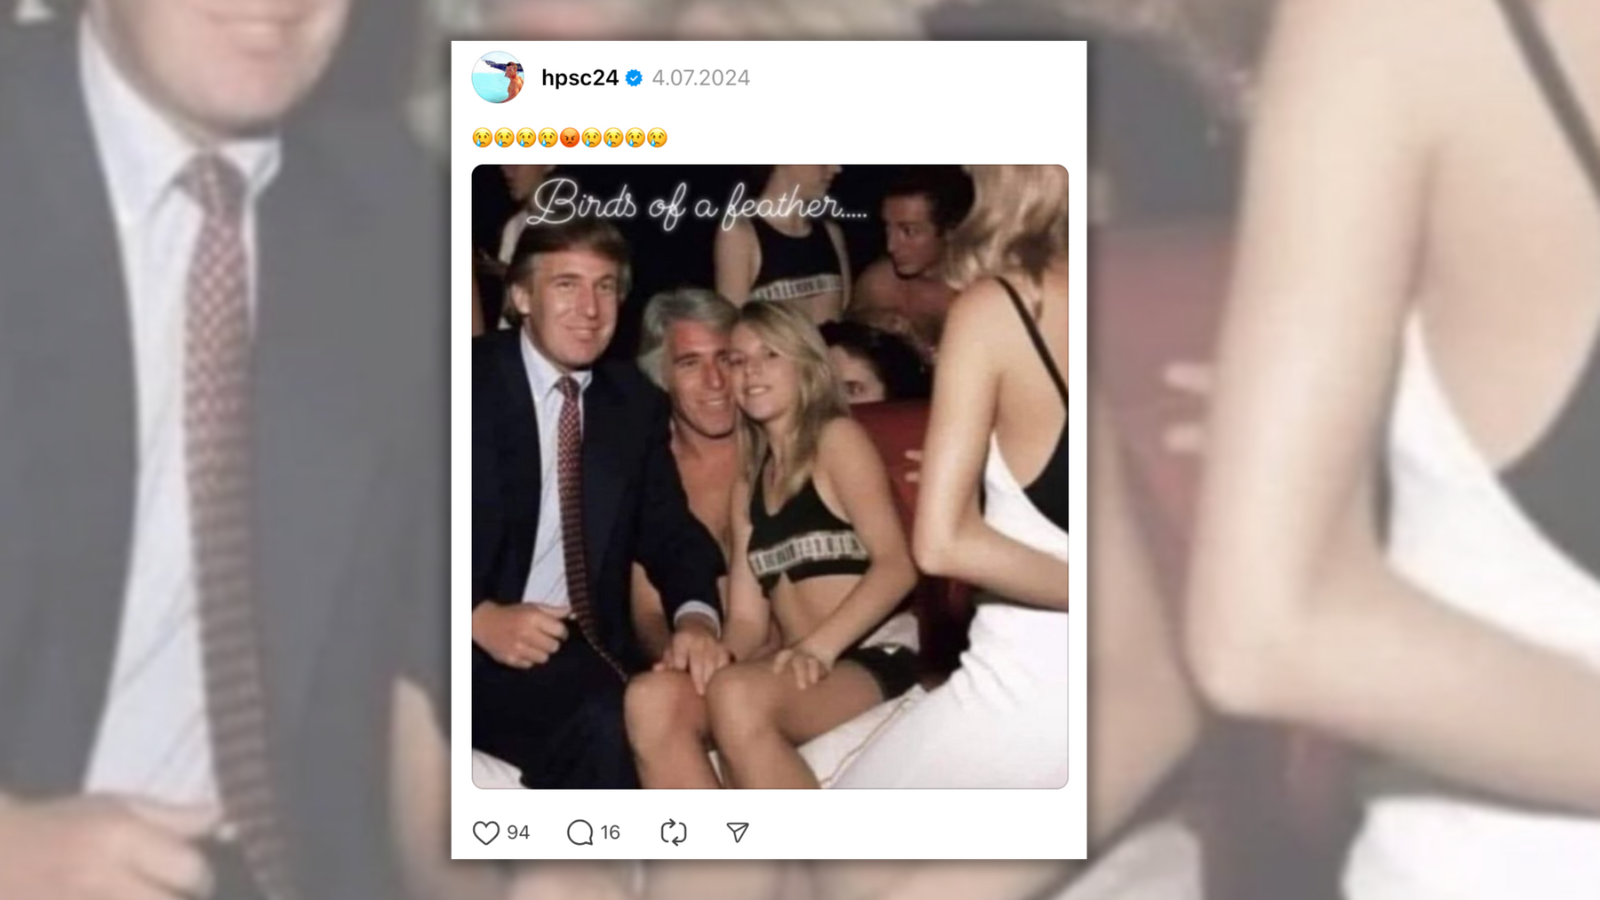 Fact Check: No, This Photo Does Not Show Epstein and Trump Posing with a Minor Girl